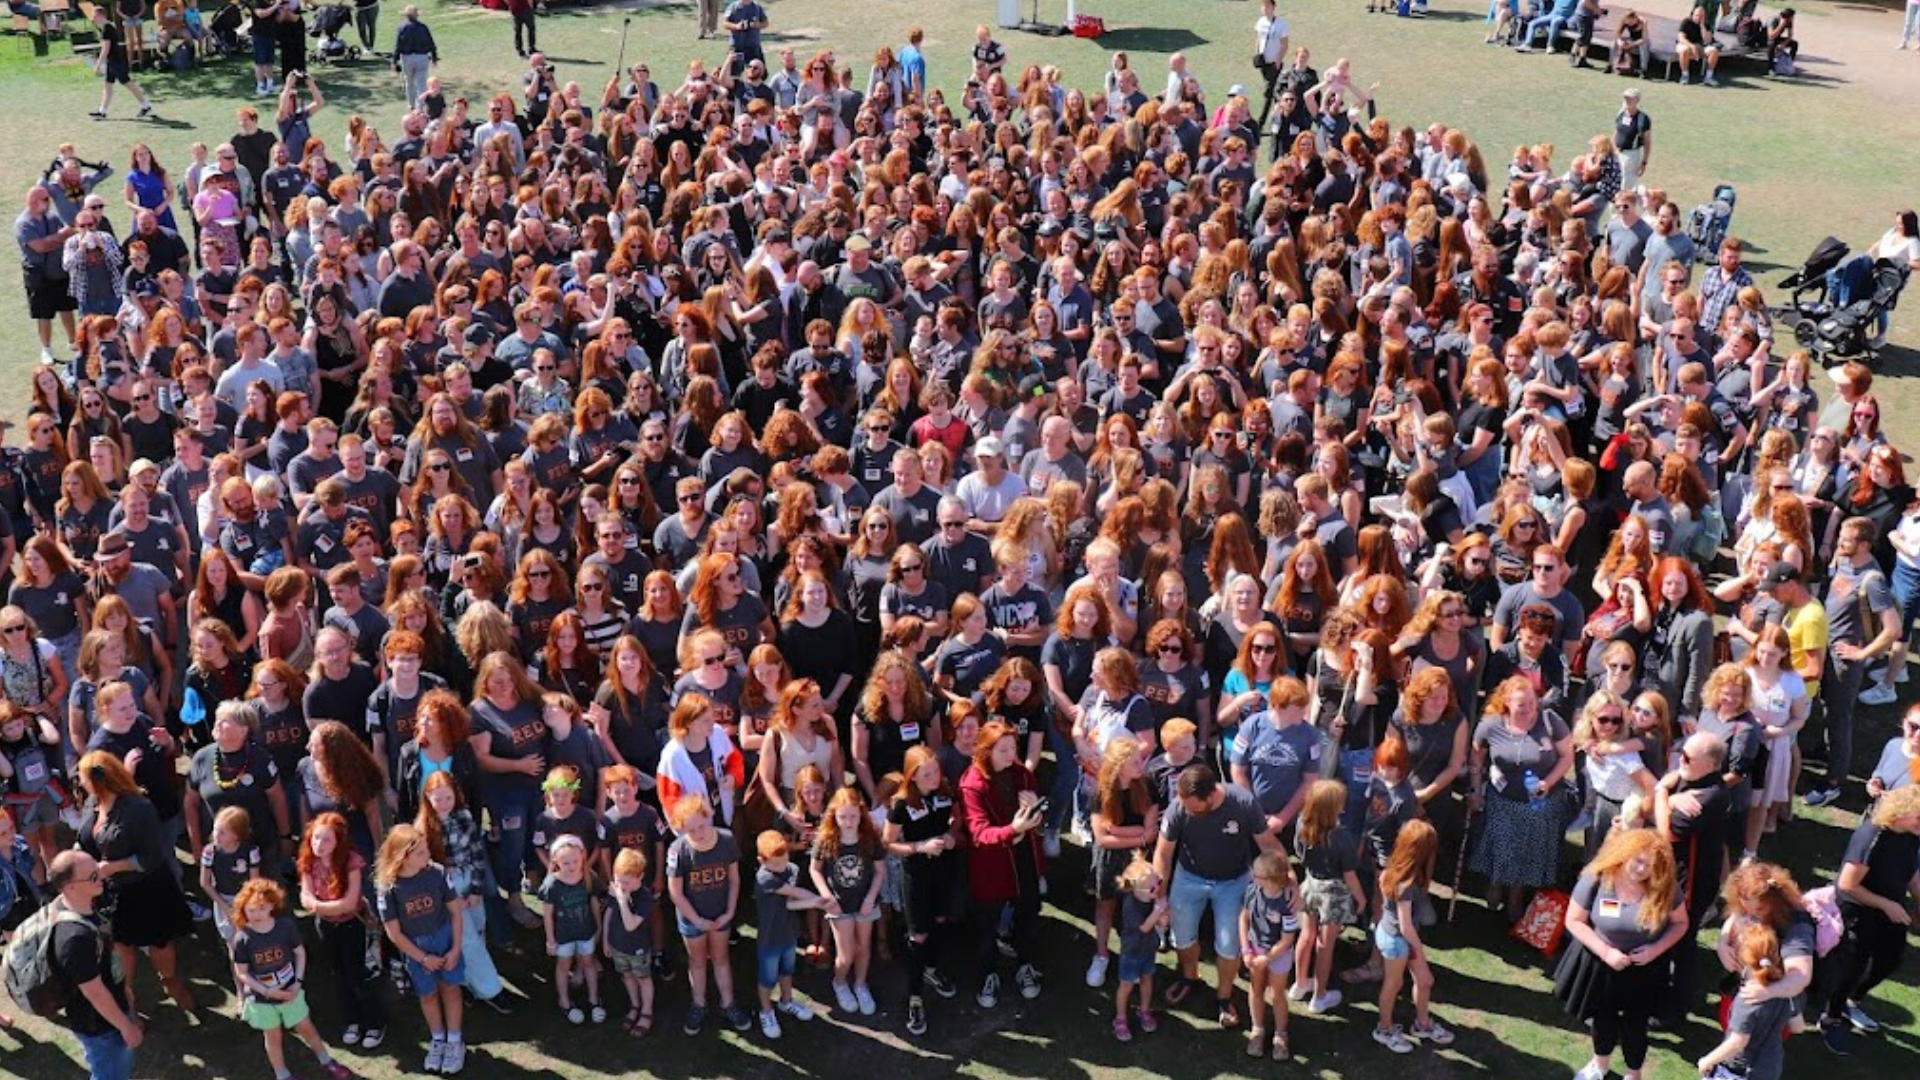 Video: This is What Happens When 1,000 Gingers Unite